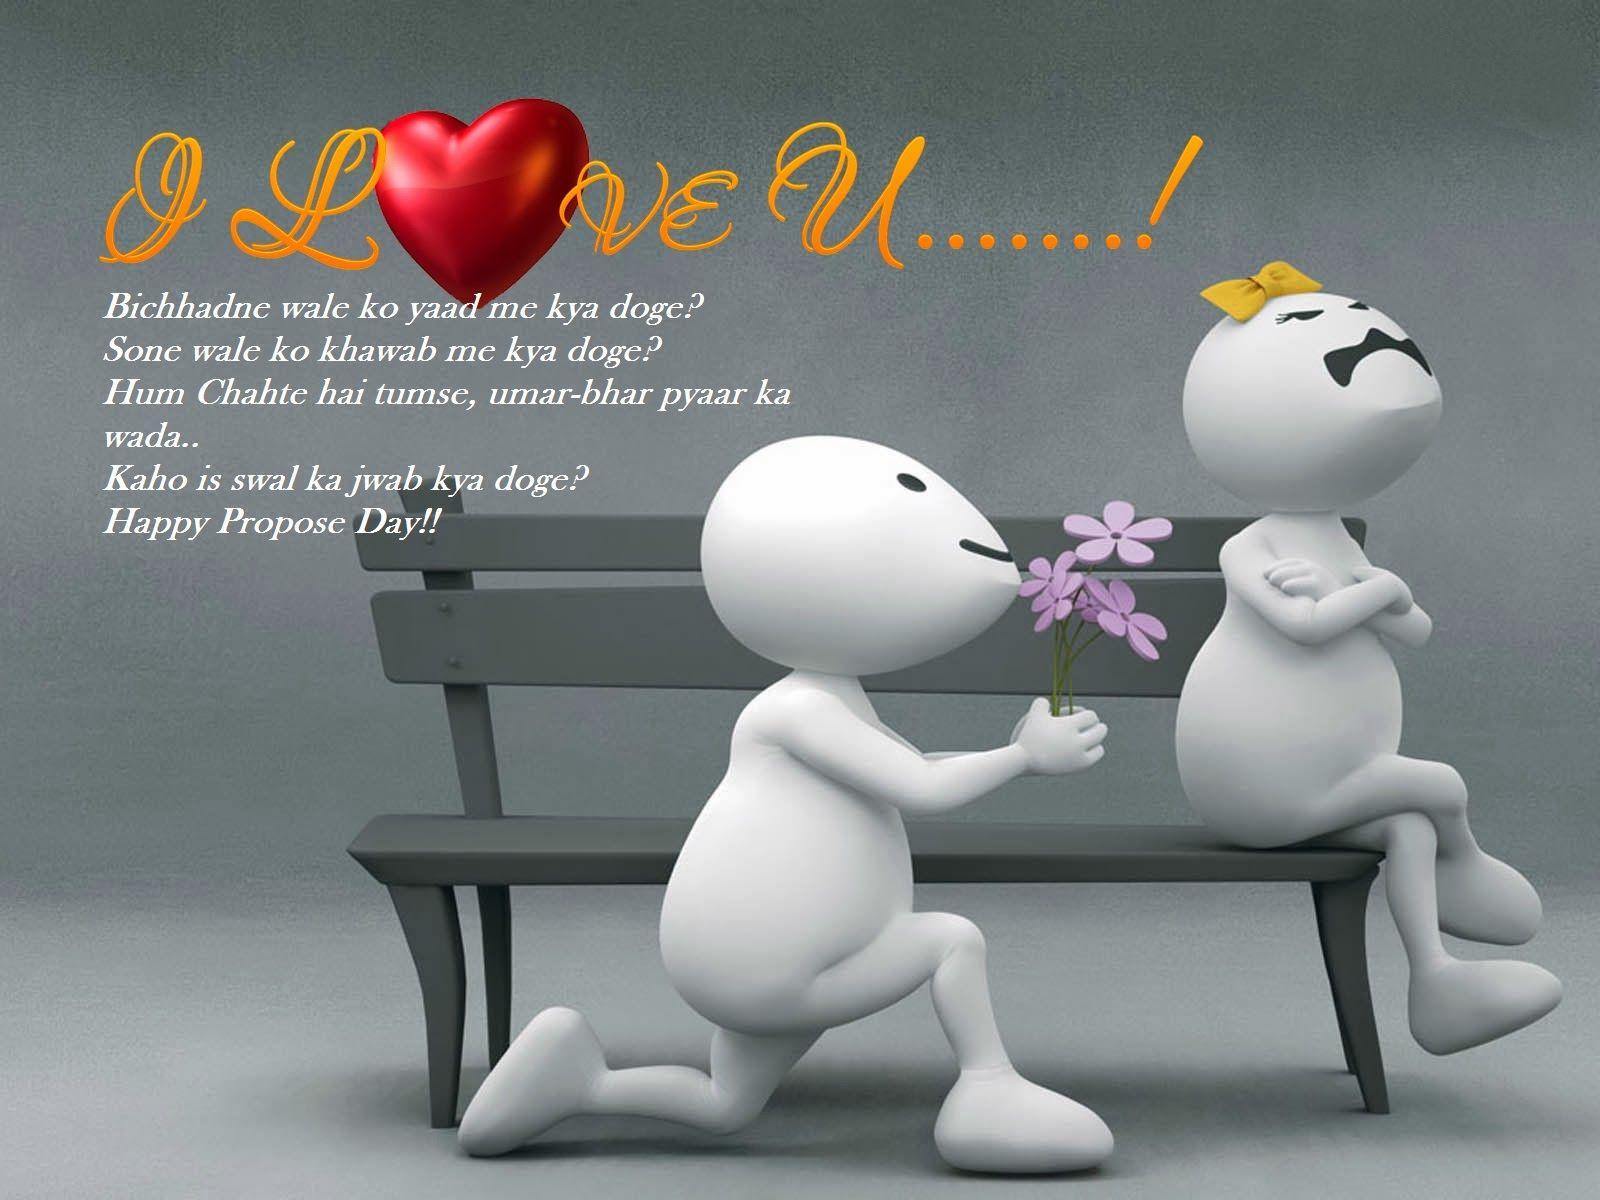 Happy Valentine's Week 2014 special: All details about each day of